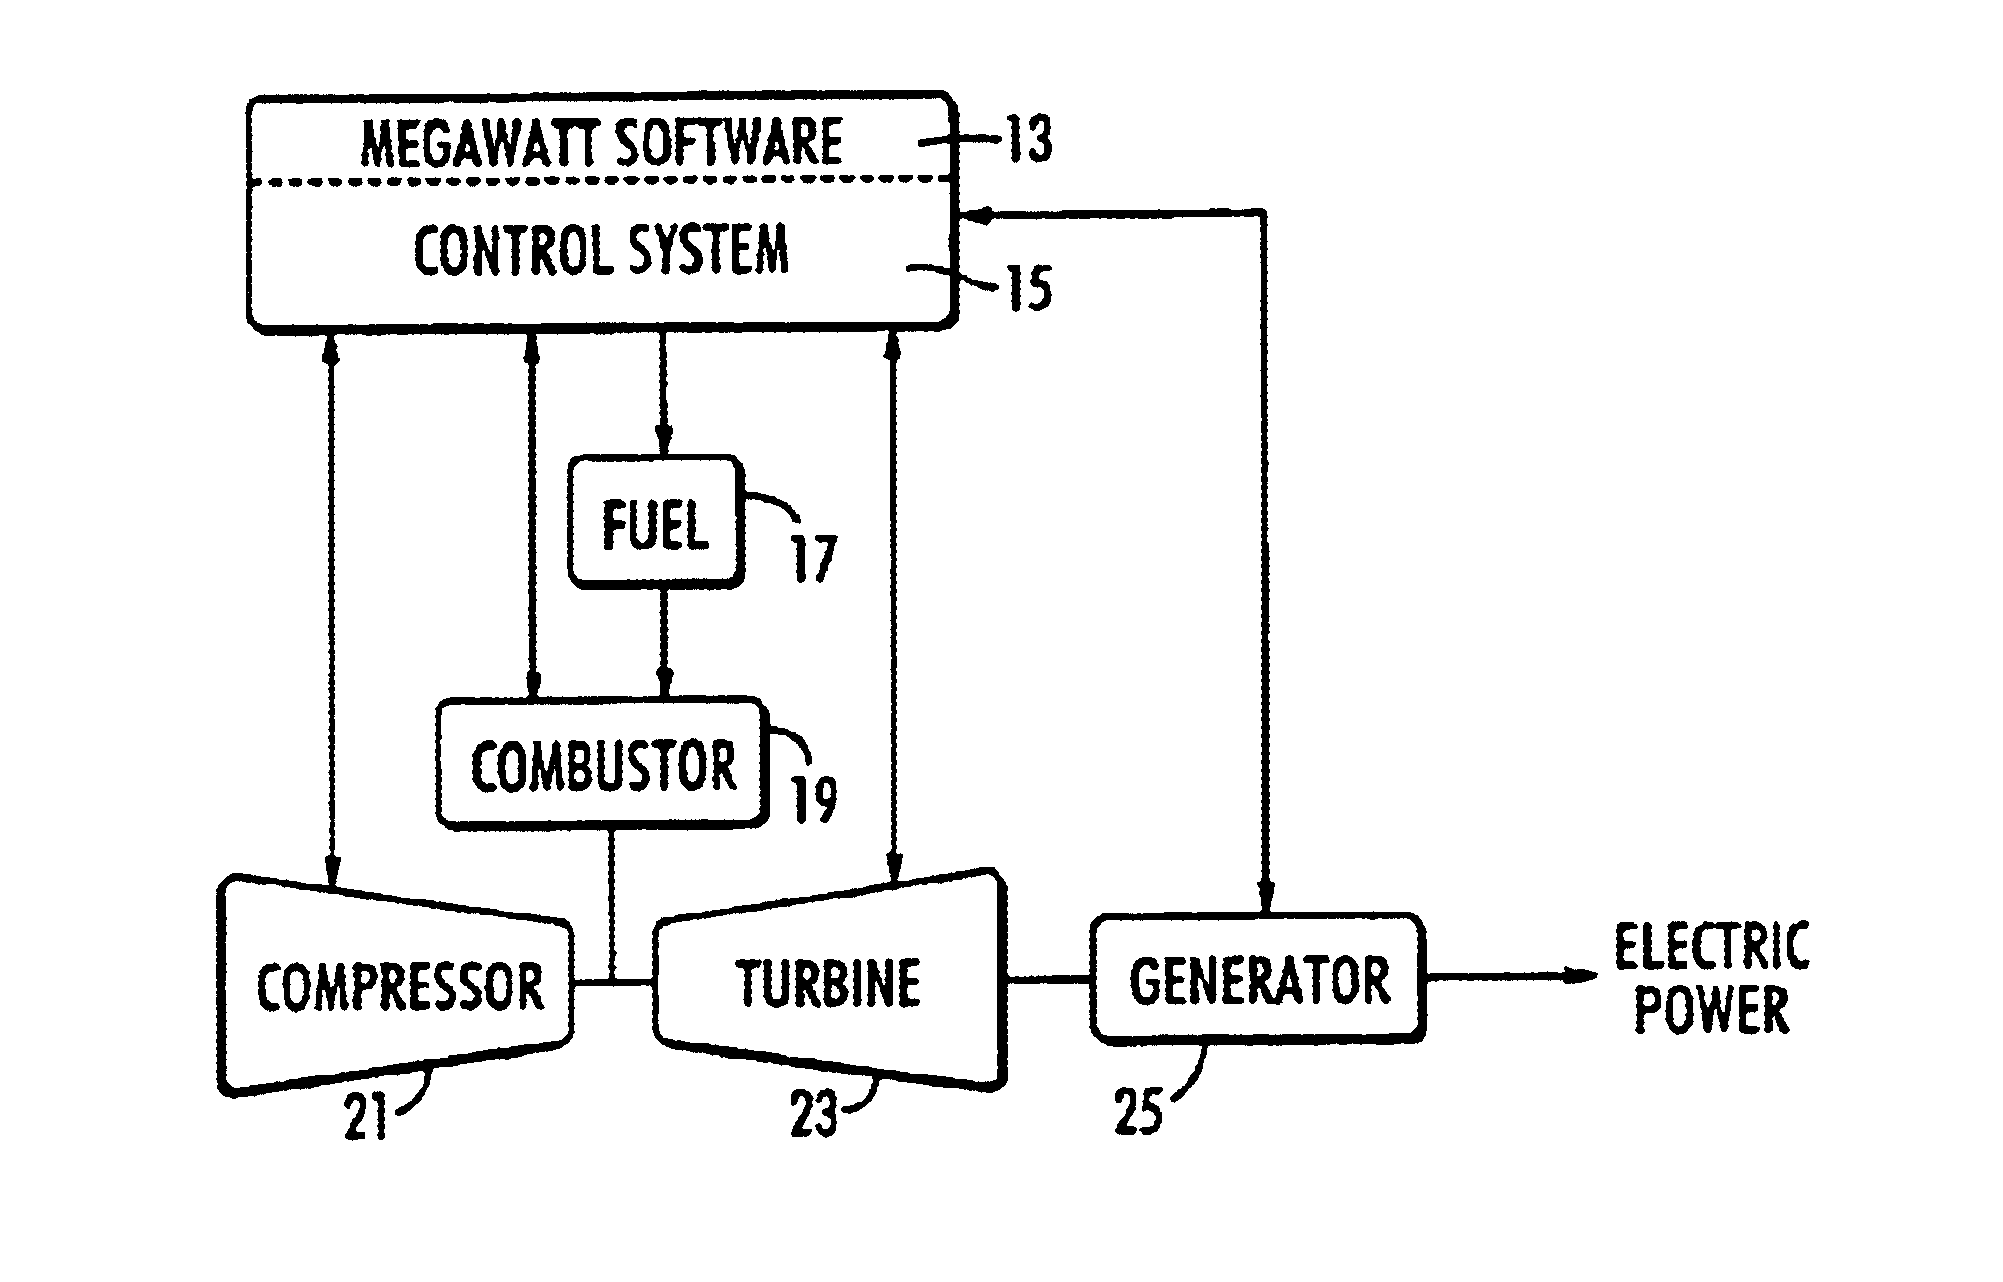 Software system for verification of gas fuel flow